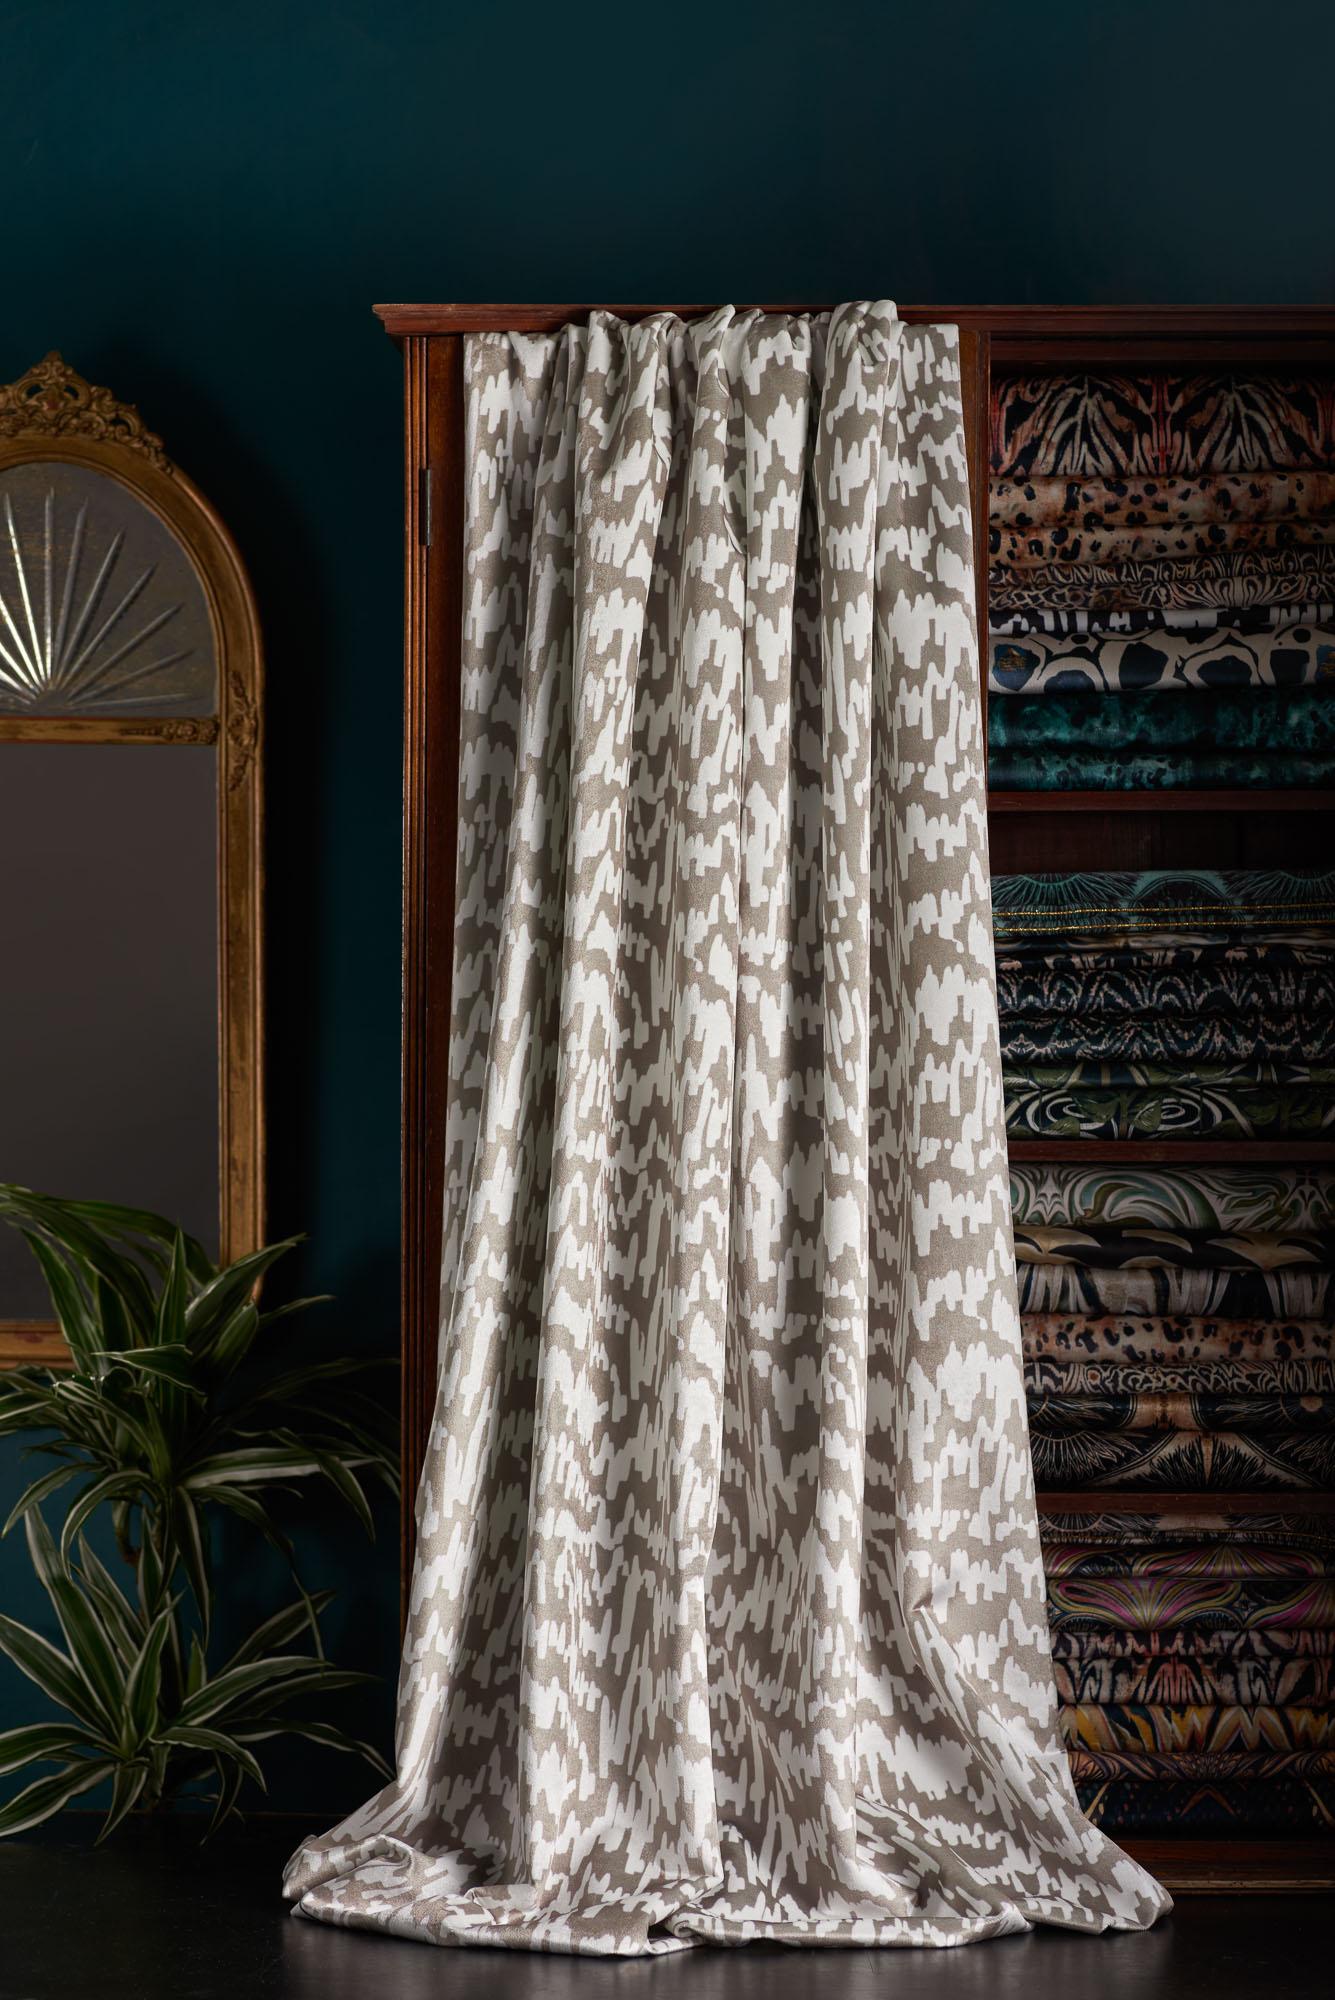 An energetic design by Anna derived from a lino print, in a versatile neutral mushroom tone.

This velvet is thick and luxurious, with a strong straight woven backing. It is suitable for upholstery, but is also light enough for curtains and